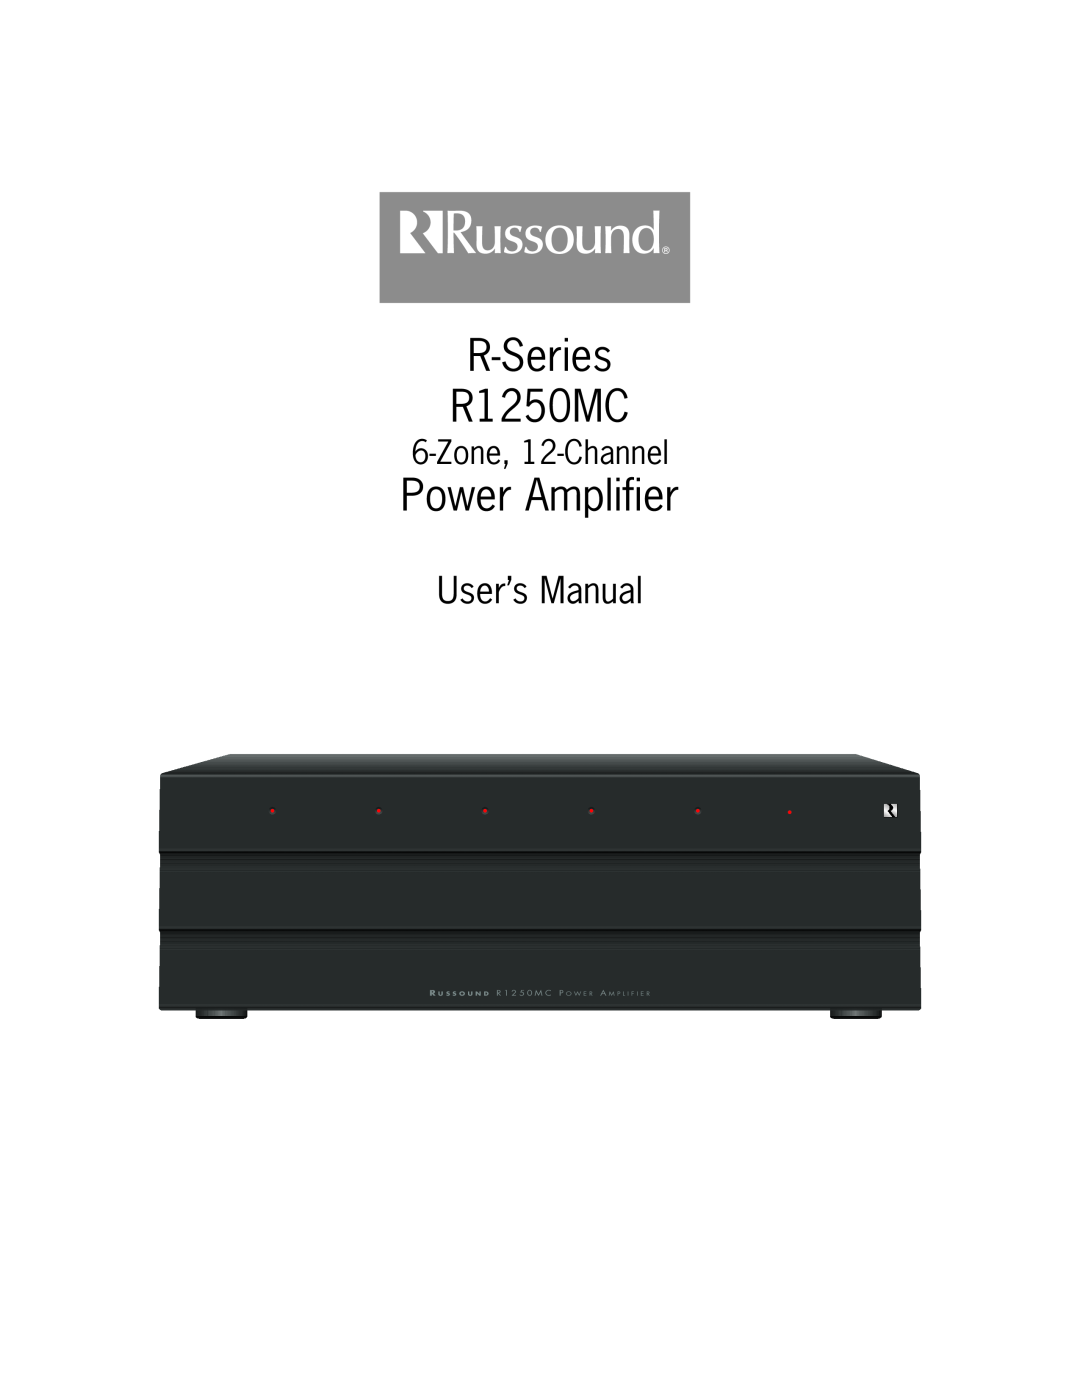 Russound user manual R-Series R1250MC, Power Amplifier, Zone, 12-Channel 